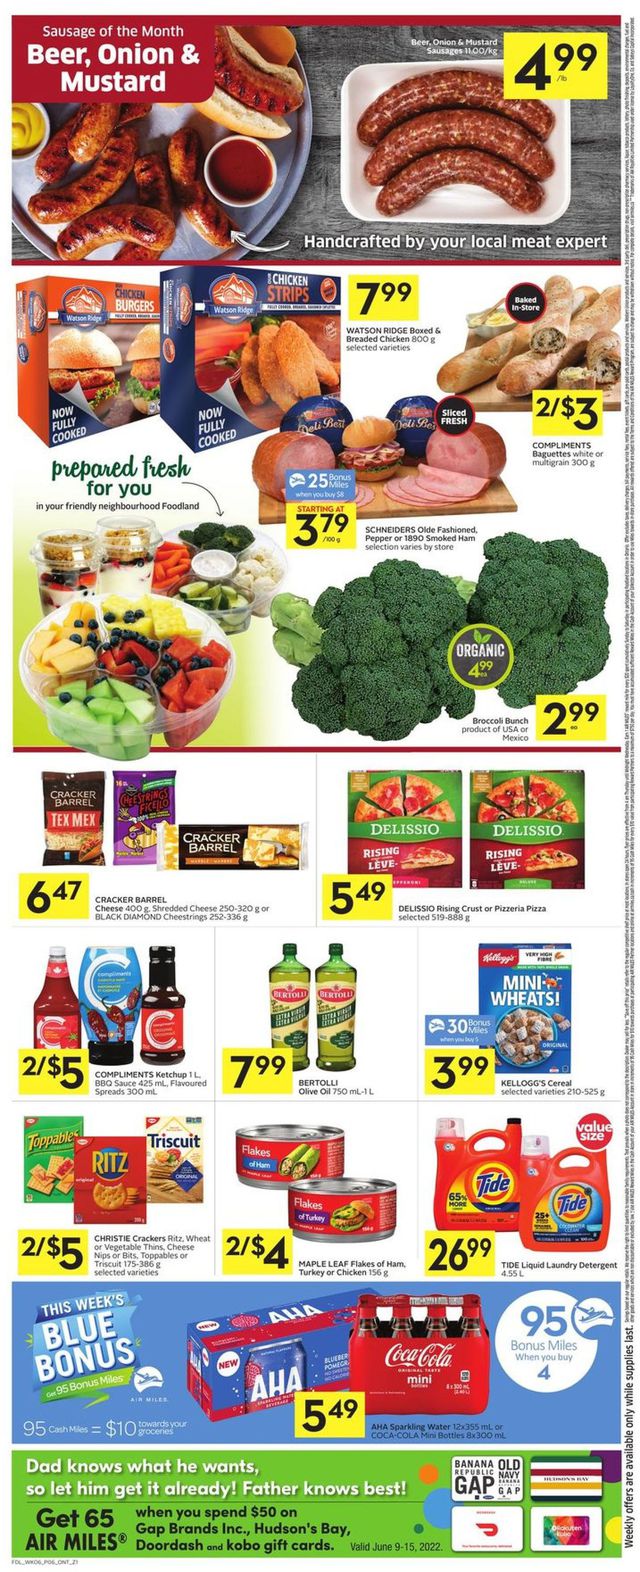 Foodland Flyer from 06/09/2022